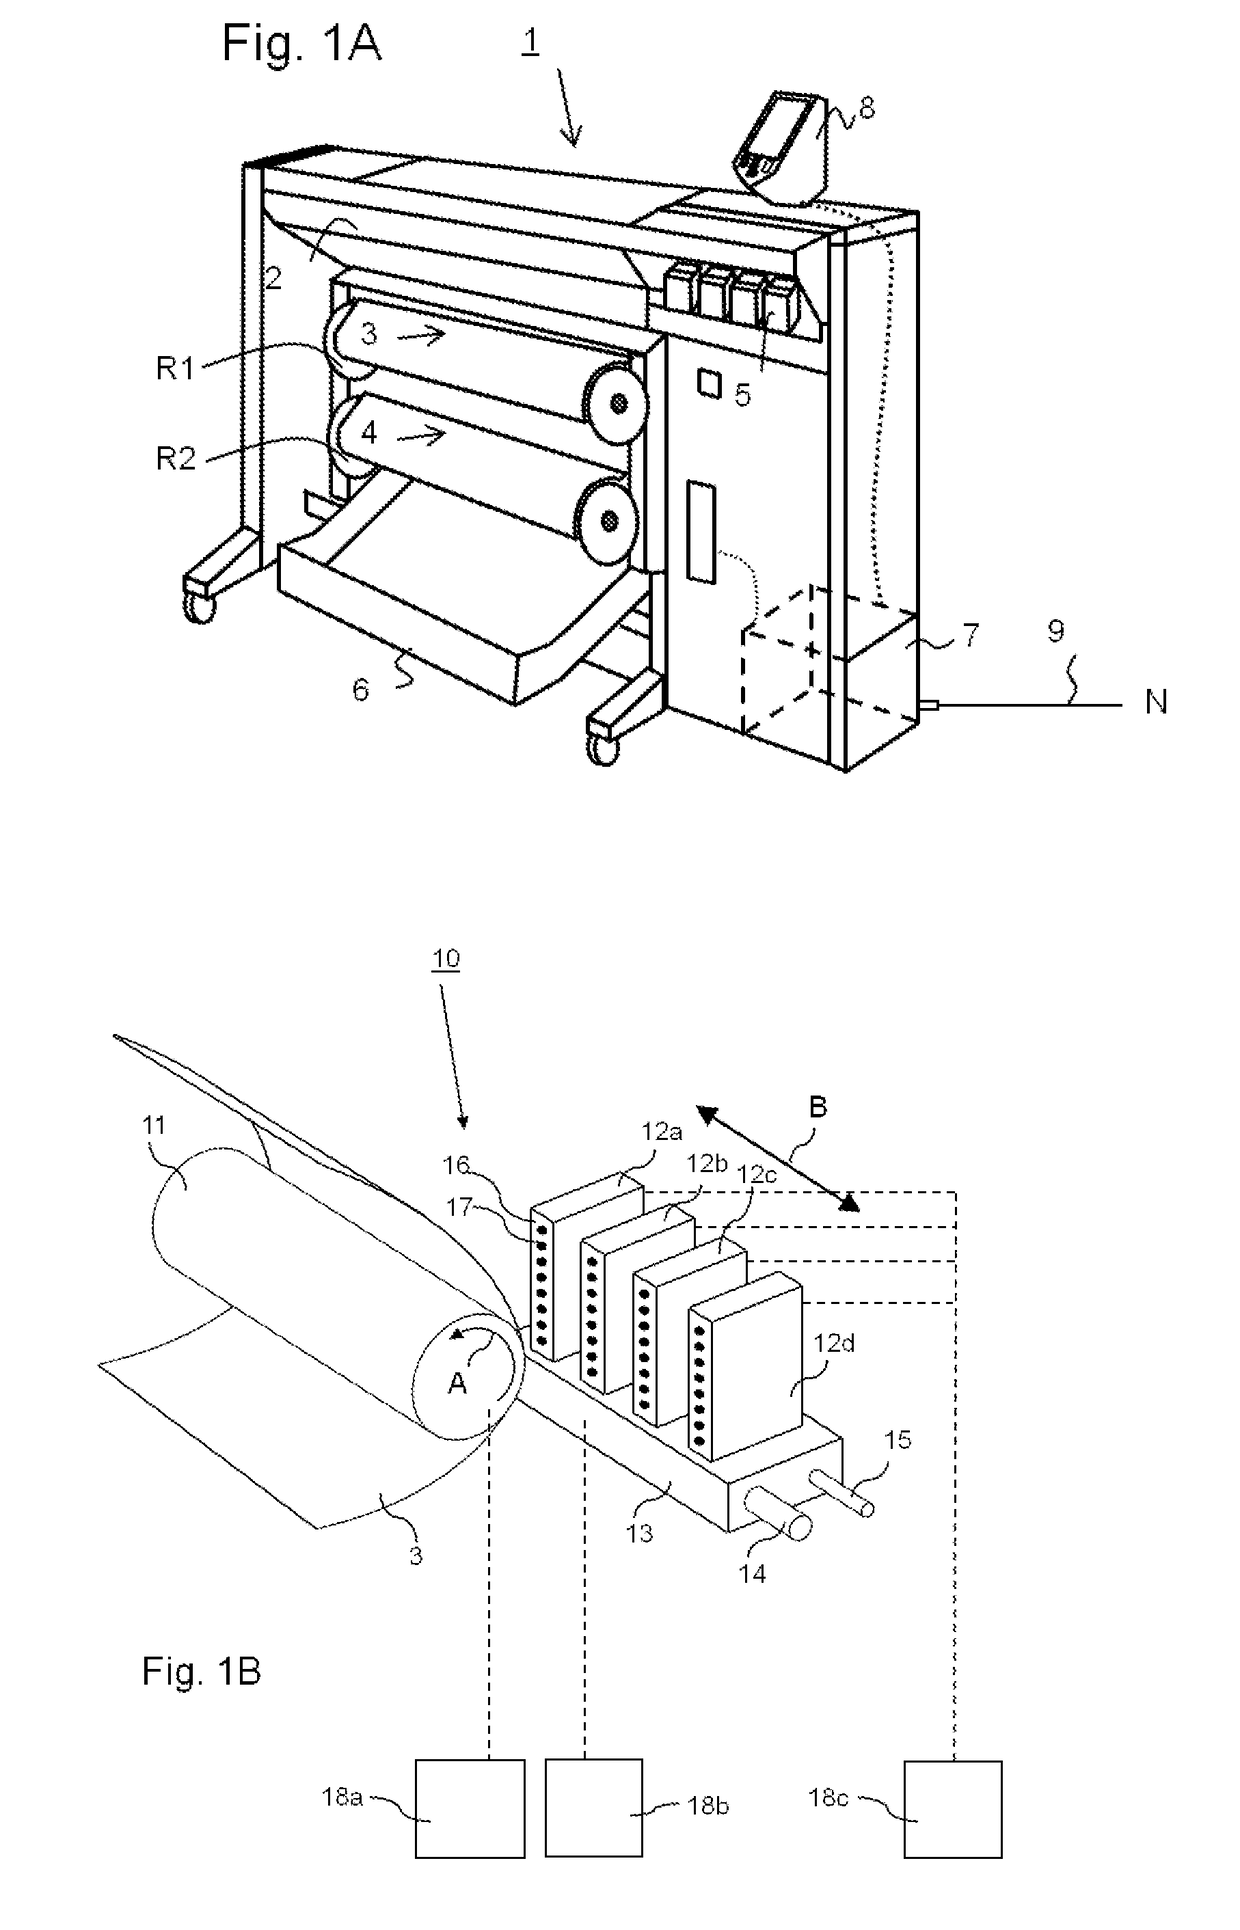 Method for controlling a web in a printing apparatus